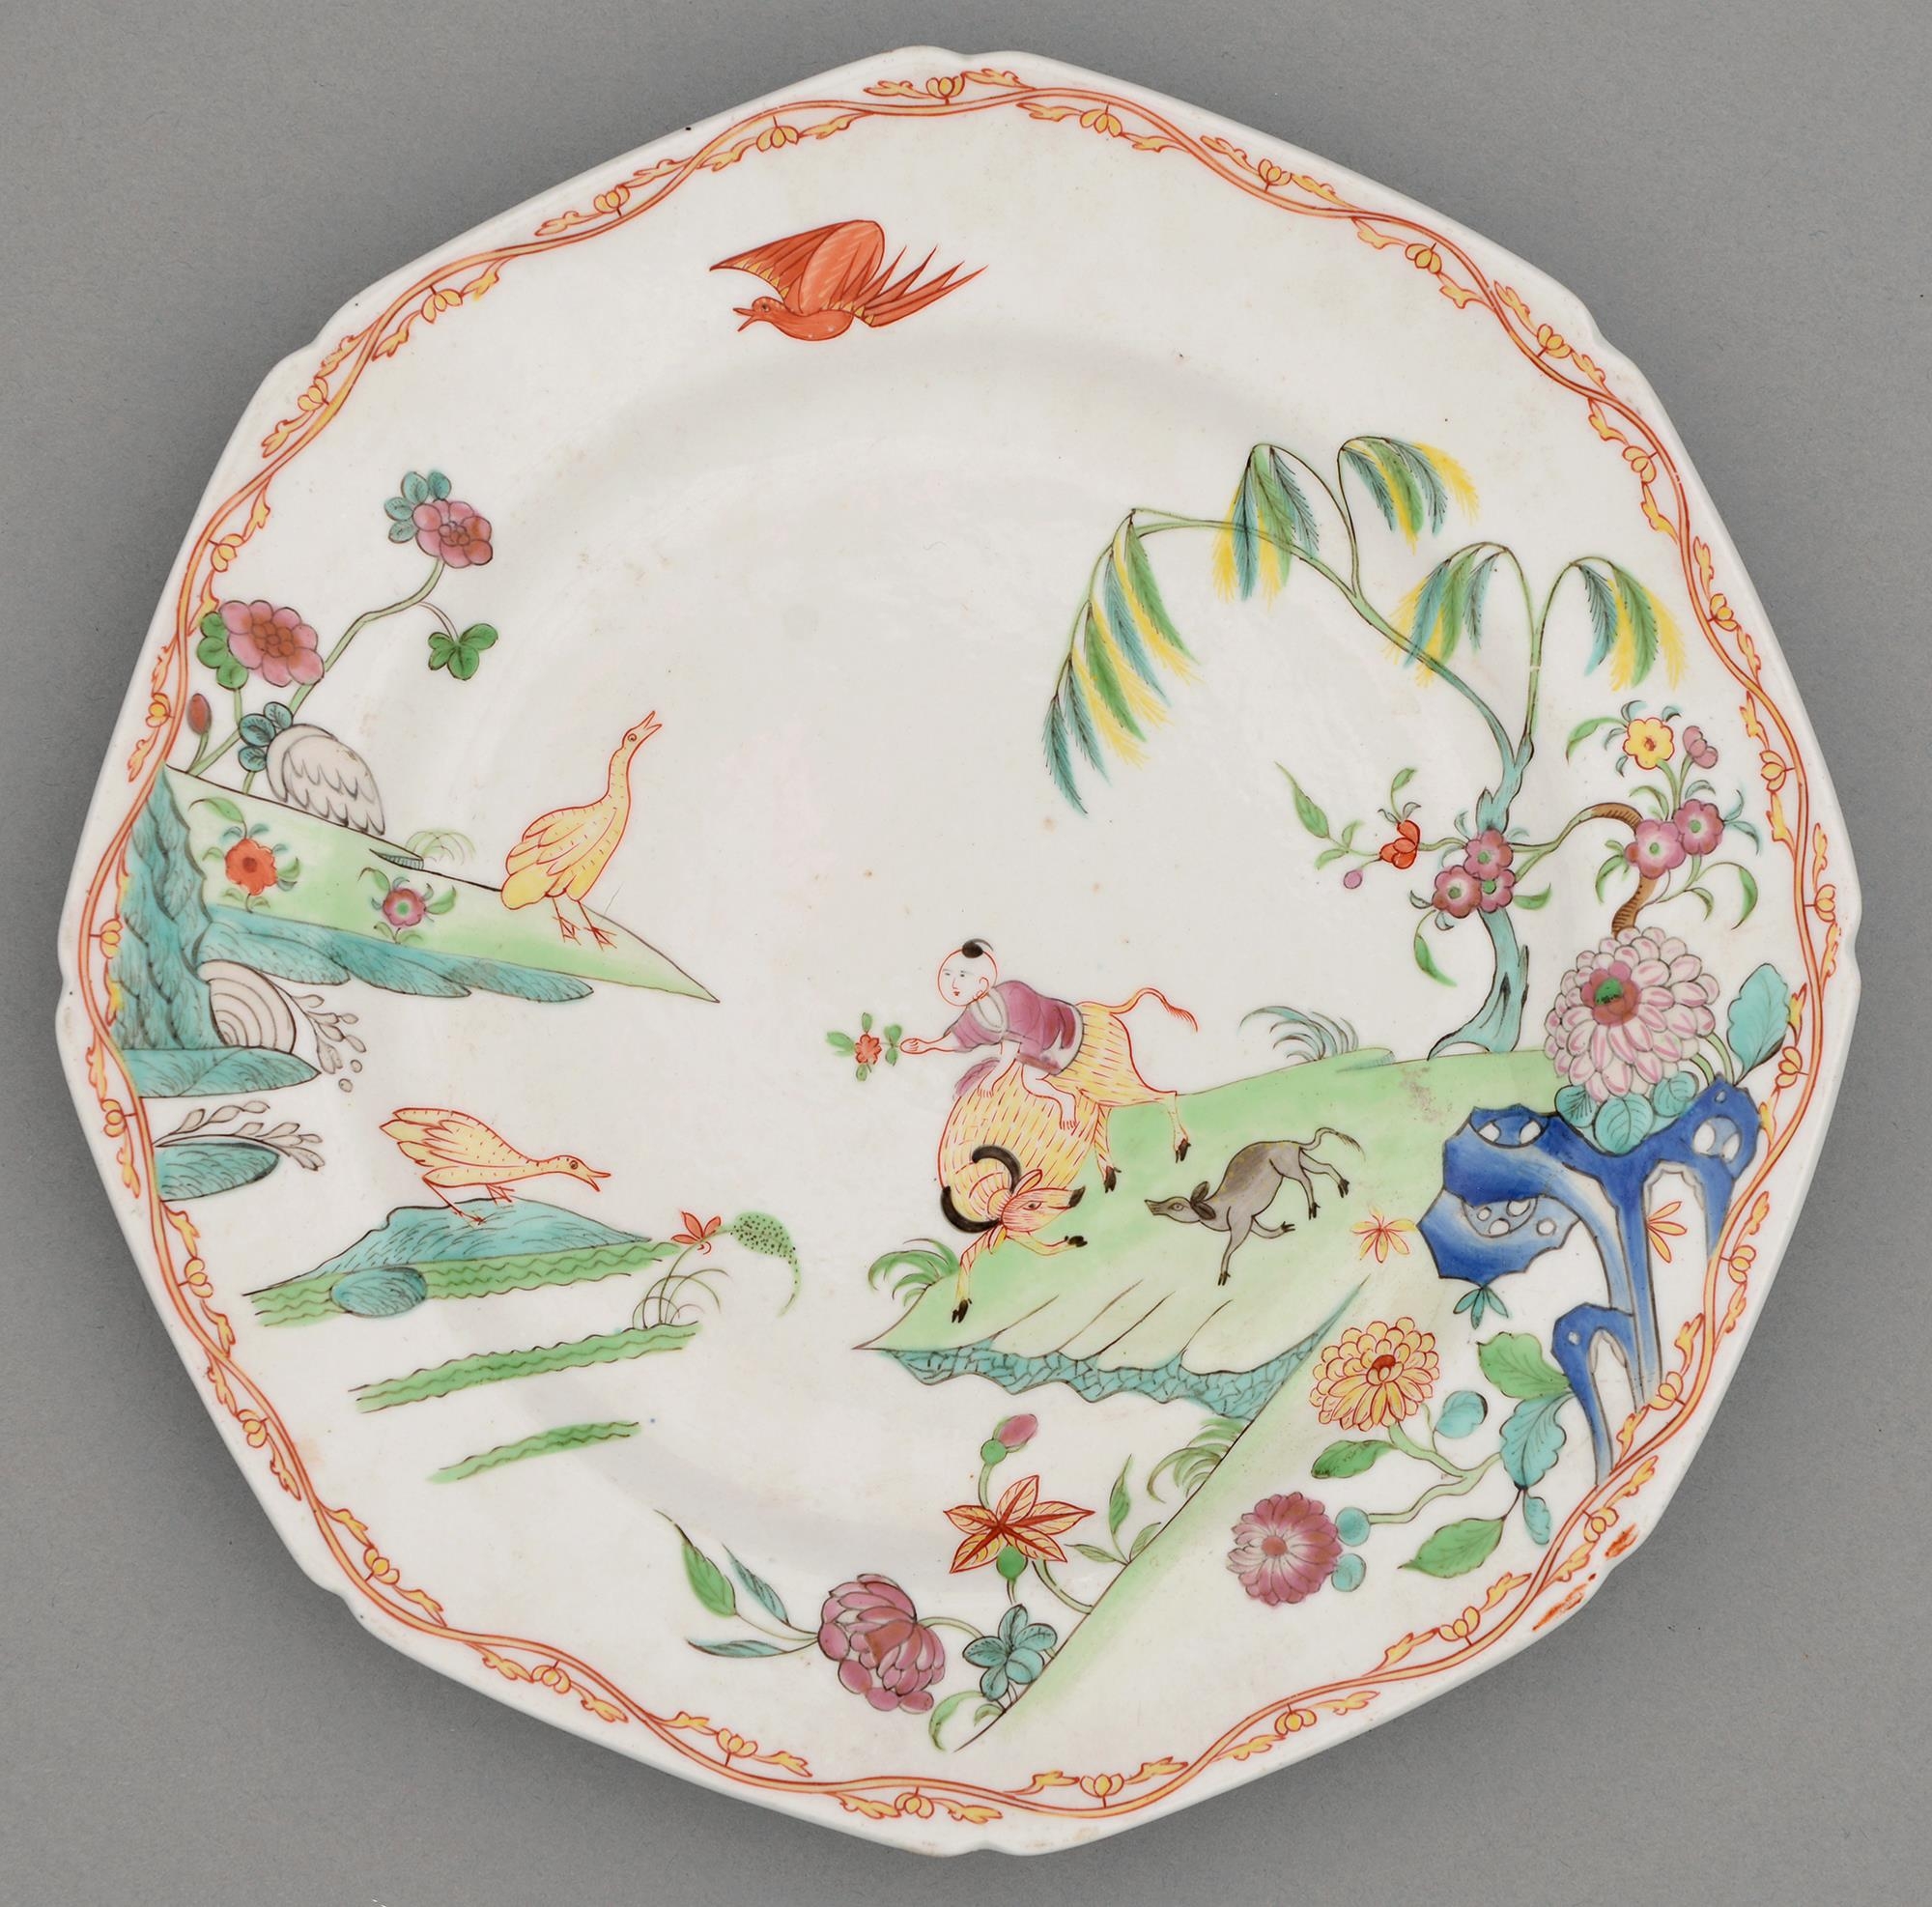 A Derby porcelain plate, c1780, enamelled with a boy on a buffalo, a dog and geese on a precipice or